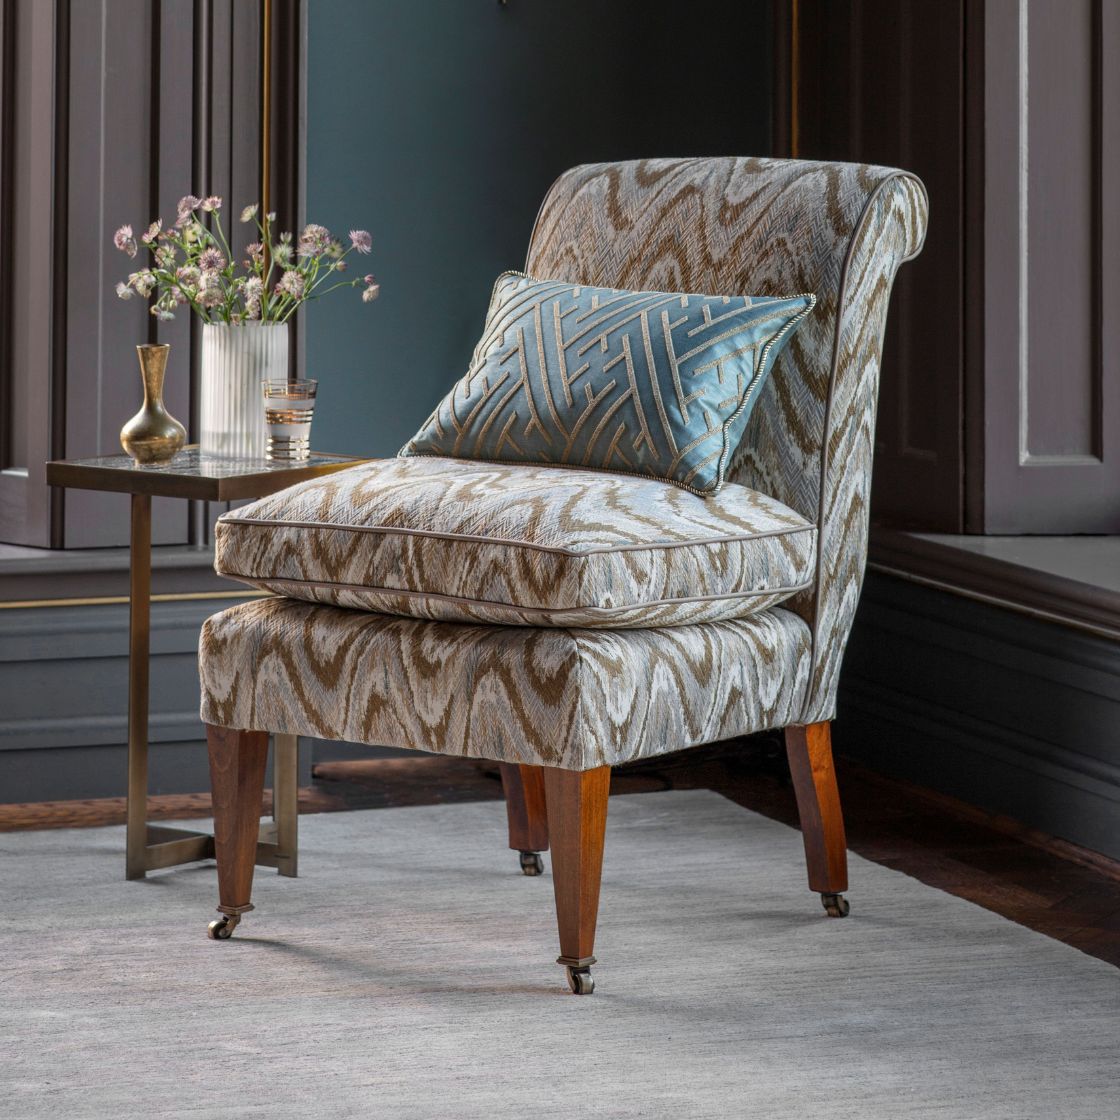 Lydia chair in Kyma - Driftwood with Elektra cushion - Beaumont & Fletcher